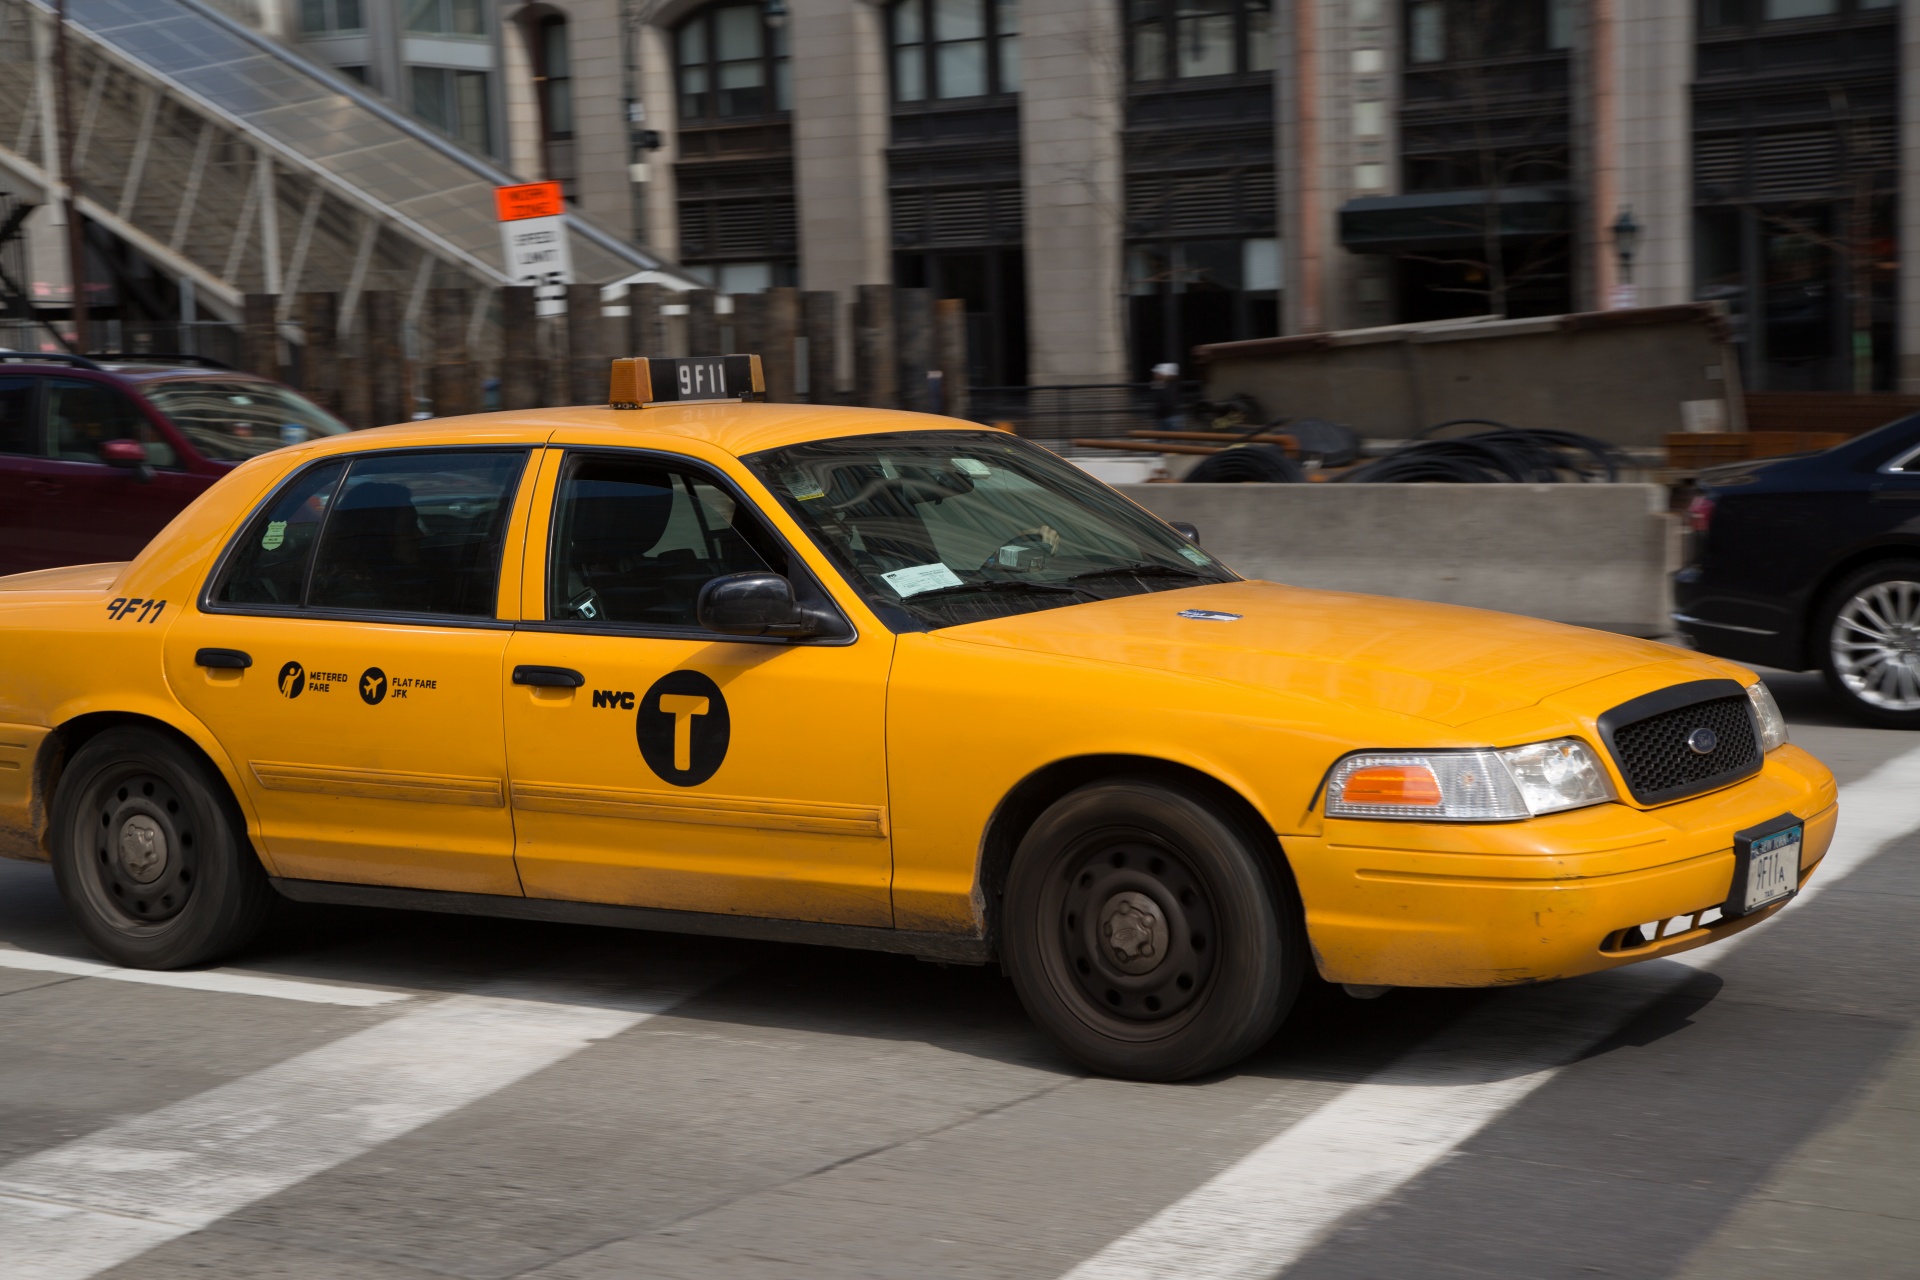 yellow,cab,new,york,nyc,american,state,america,travel,view,business,central...